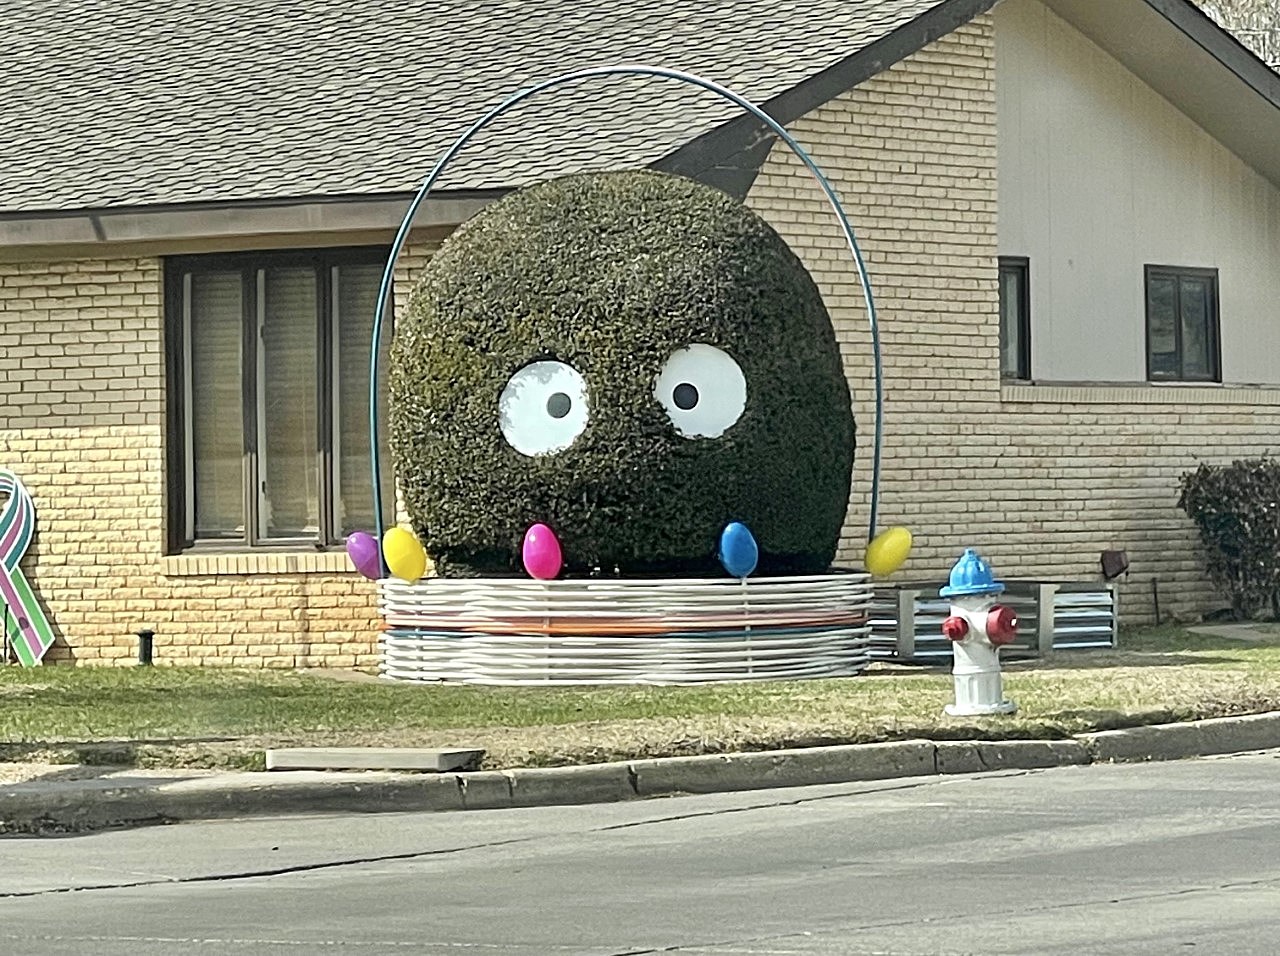 Lubbock's Smiling Bush Gets Transformed Into New Year's Eve Ball